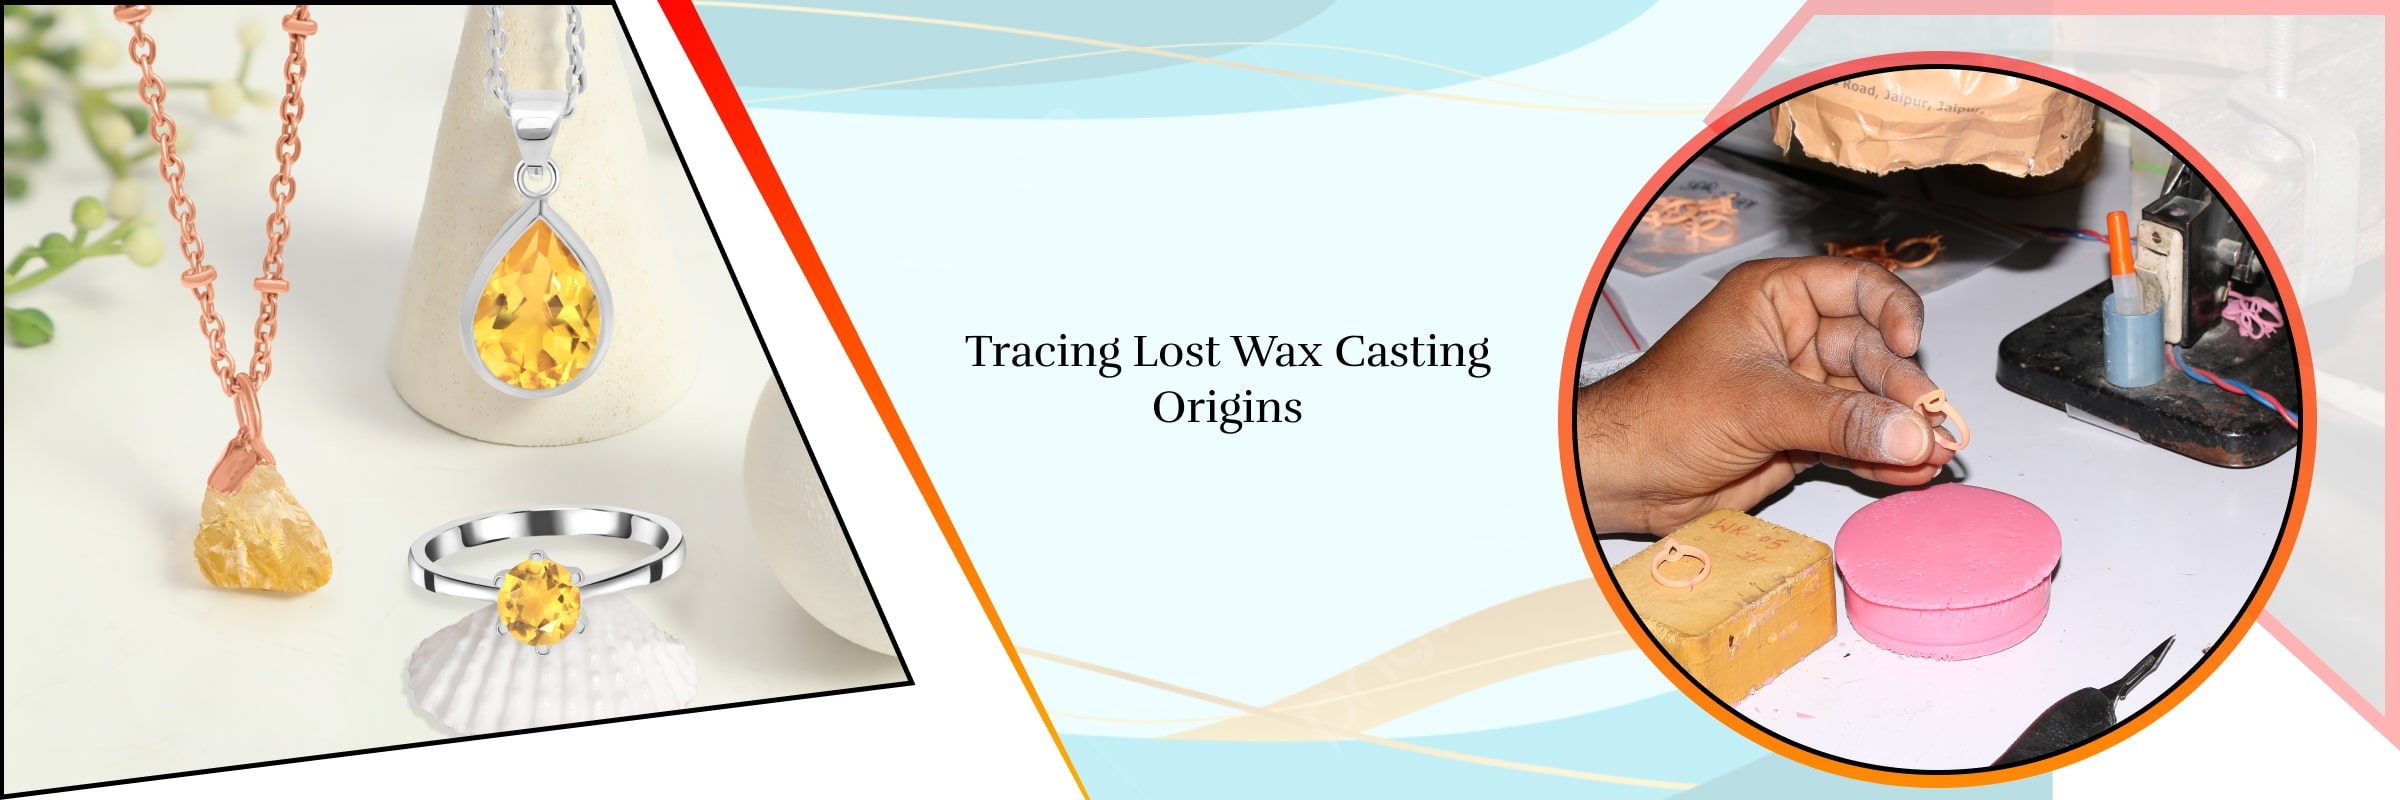 The History of Lost Wax Casting